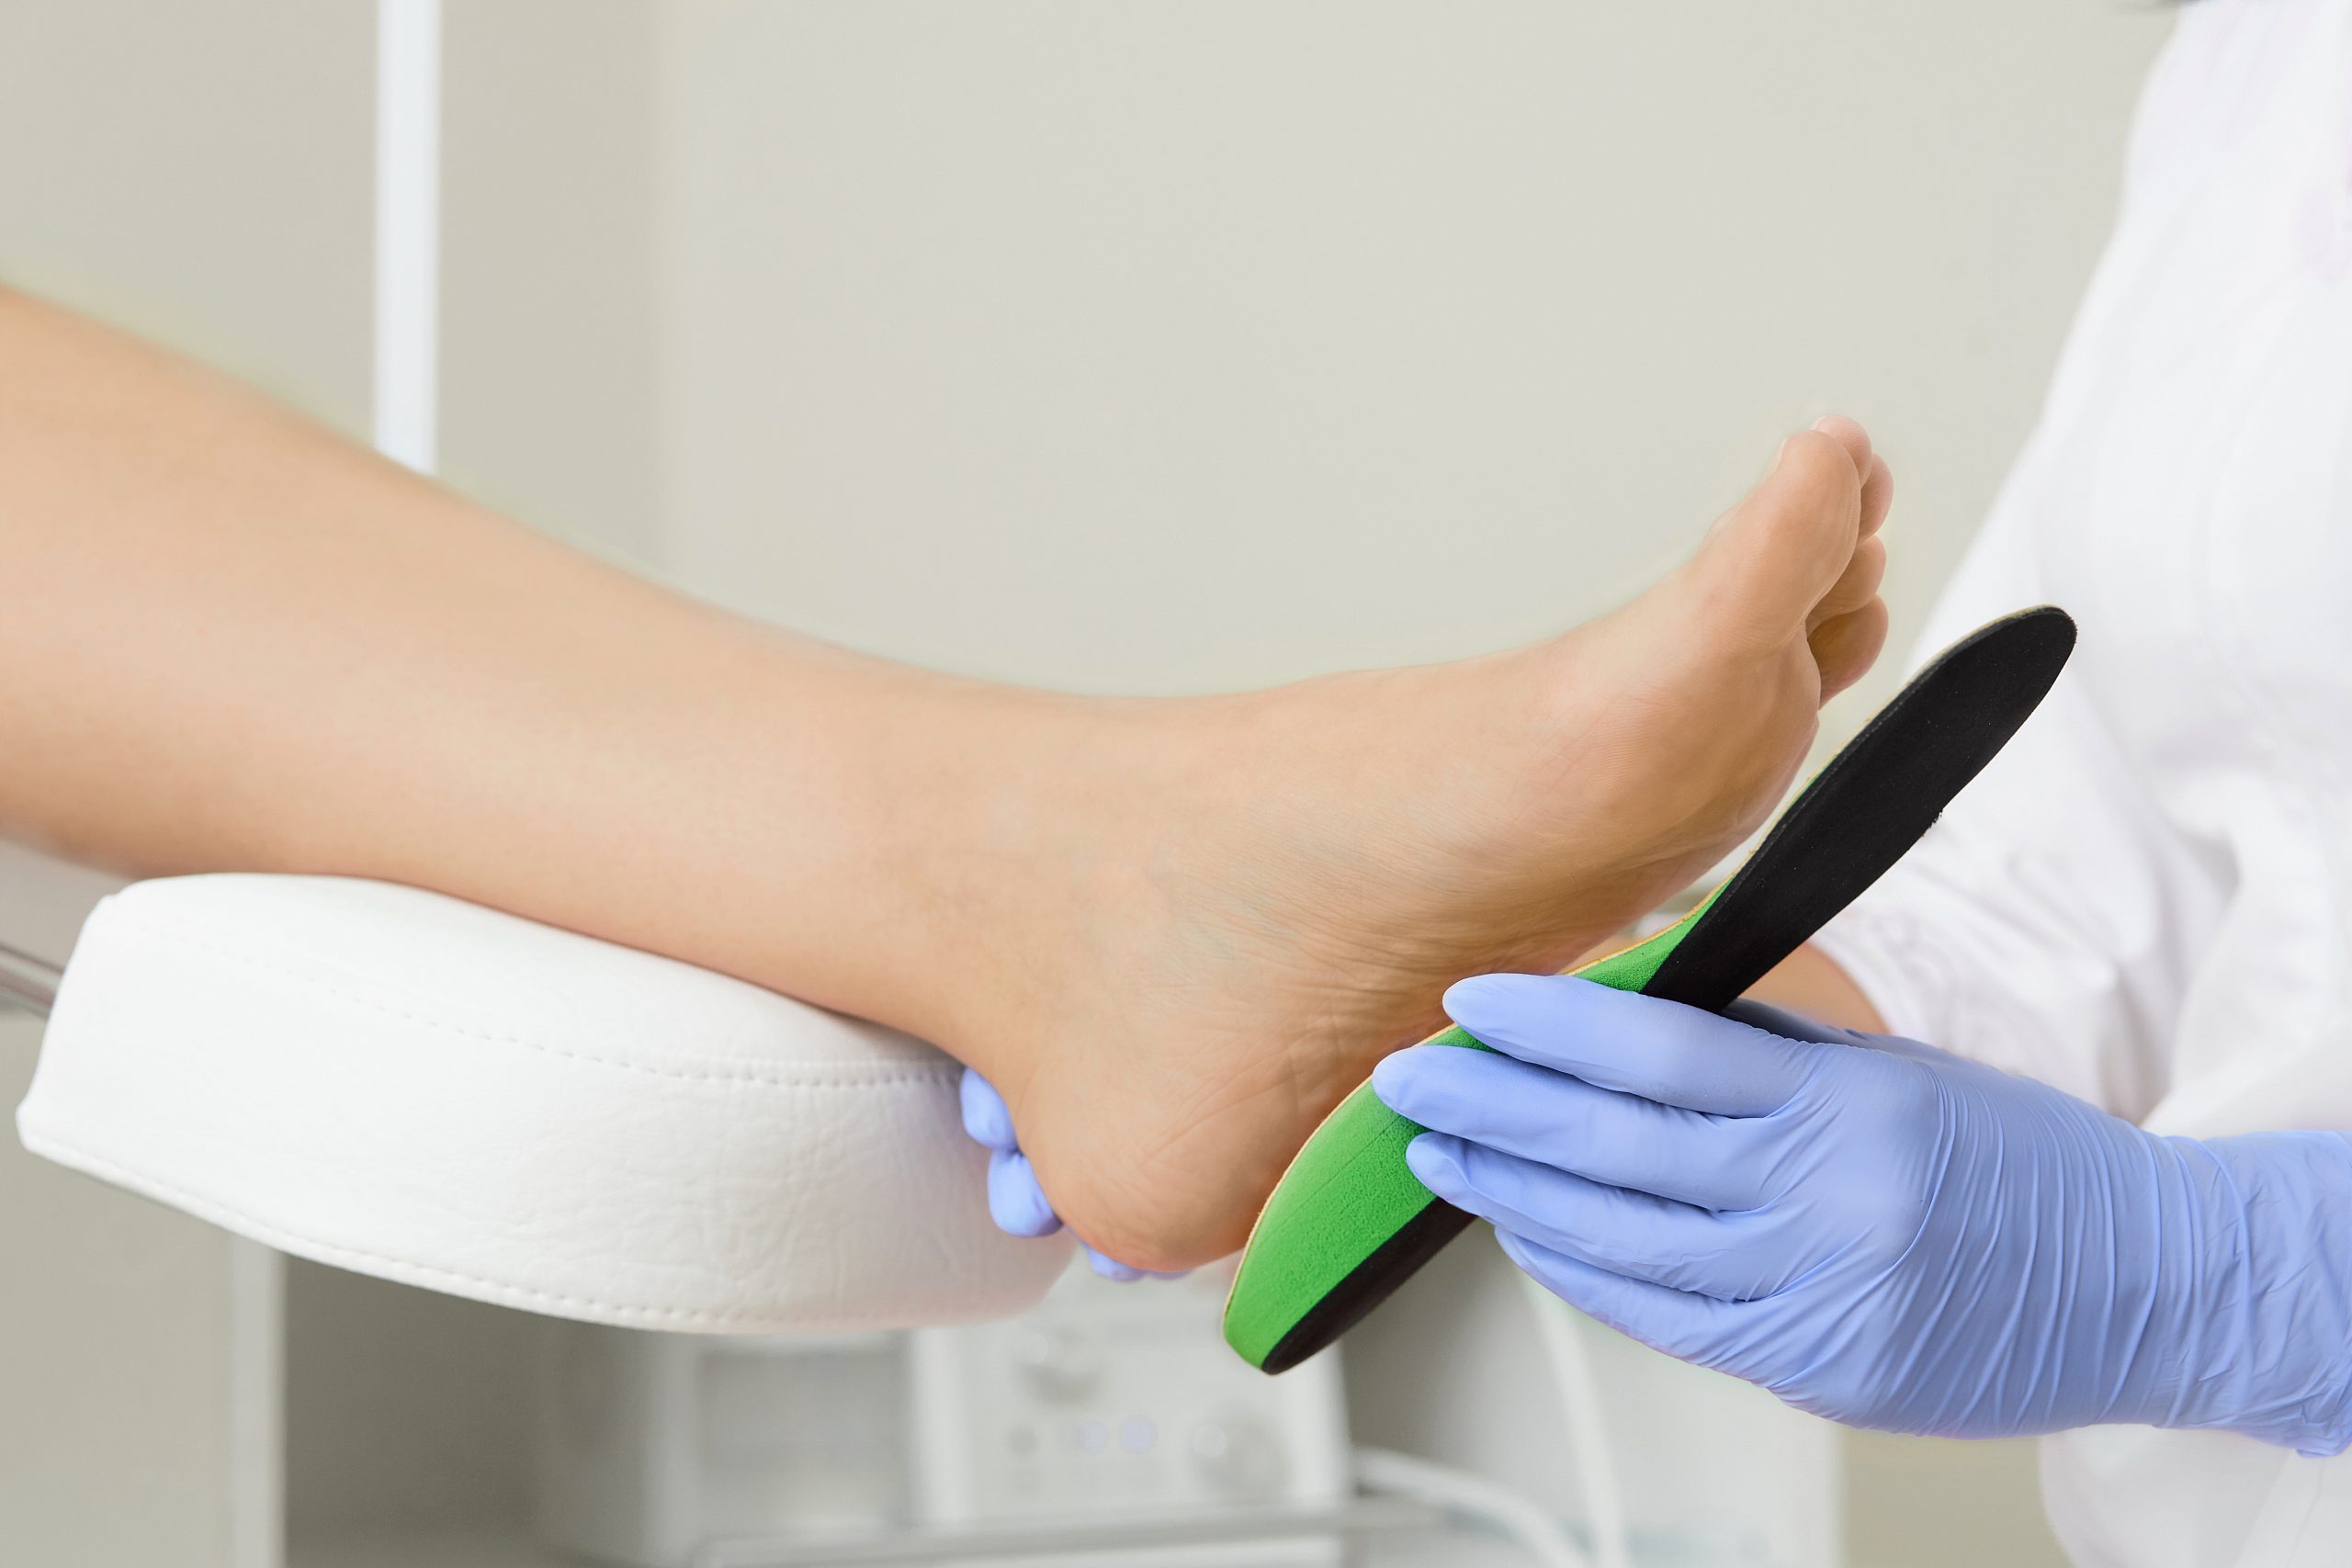 How long do foot orthoses last?